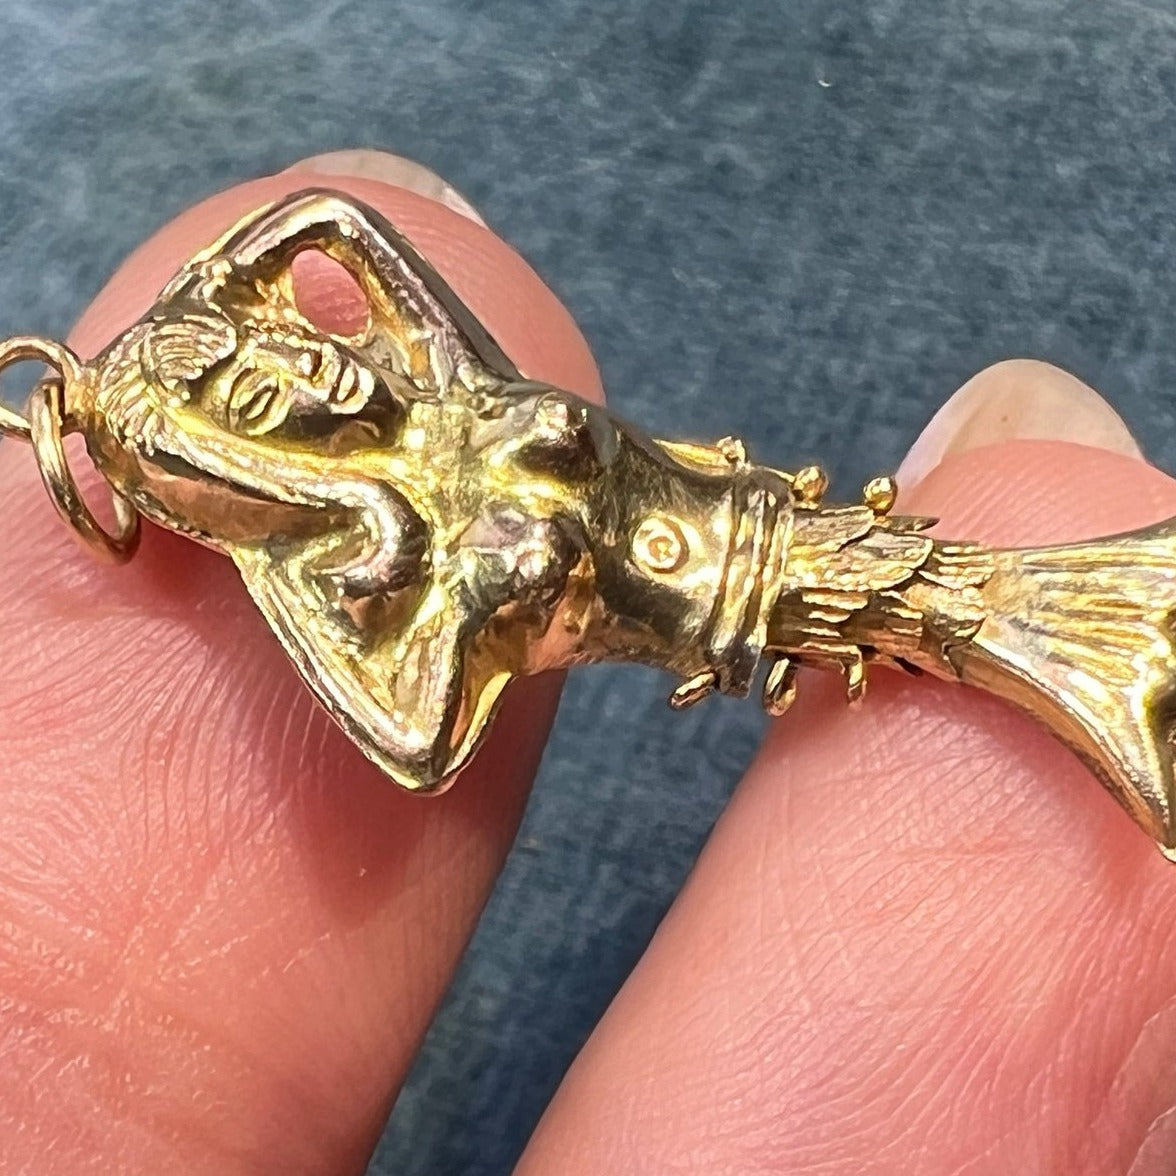 14k Gold Mermaid Pendant w Jointed Articulated Tail. 1"